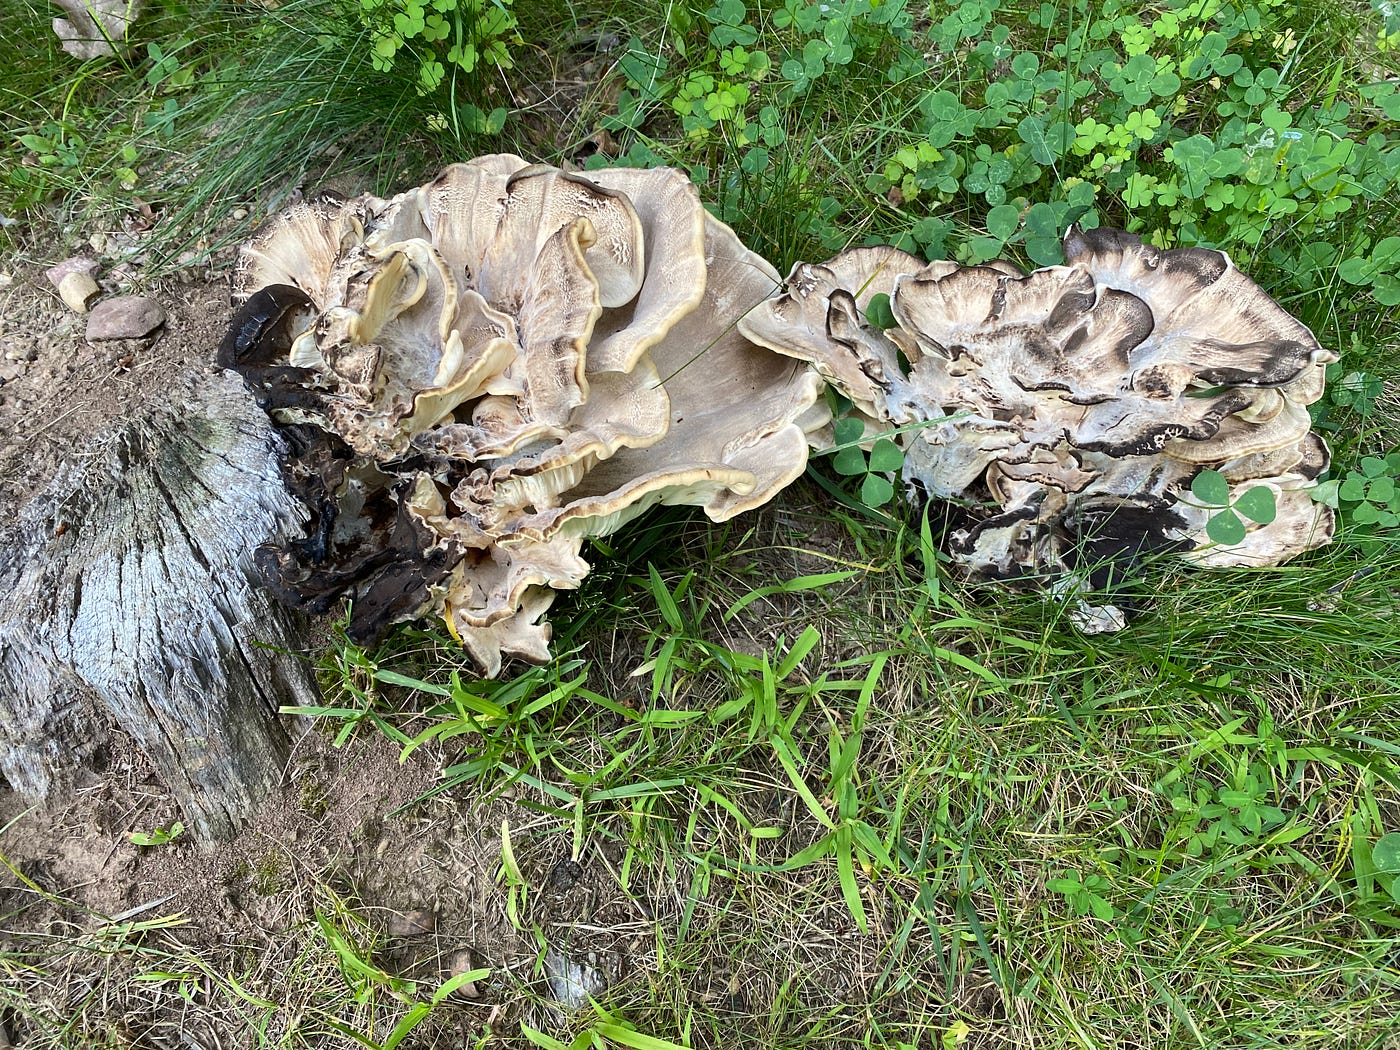 Image of fungus growing on the stump of a tree